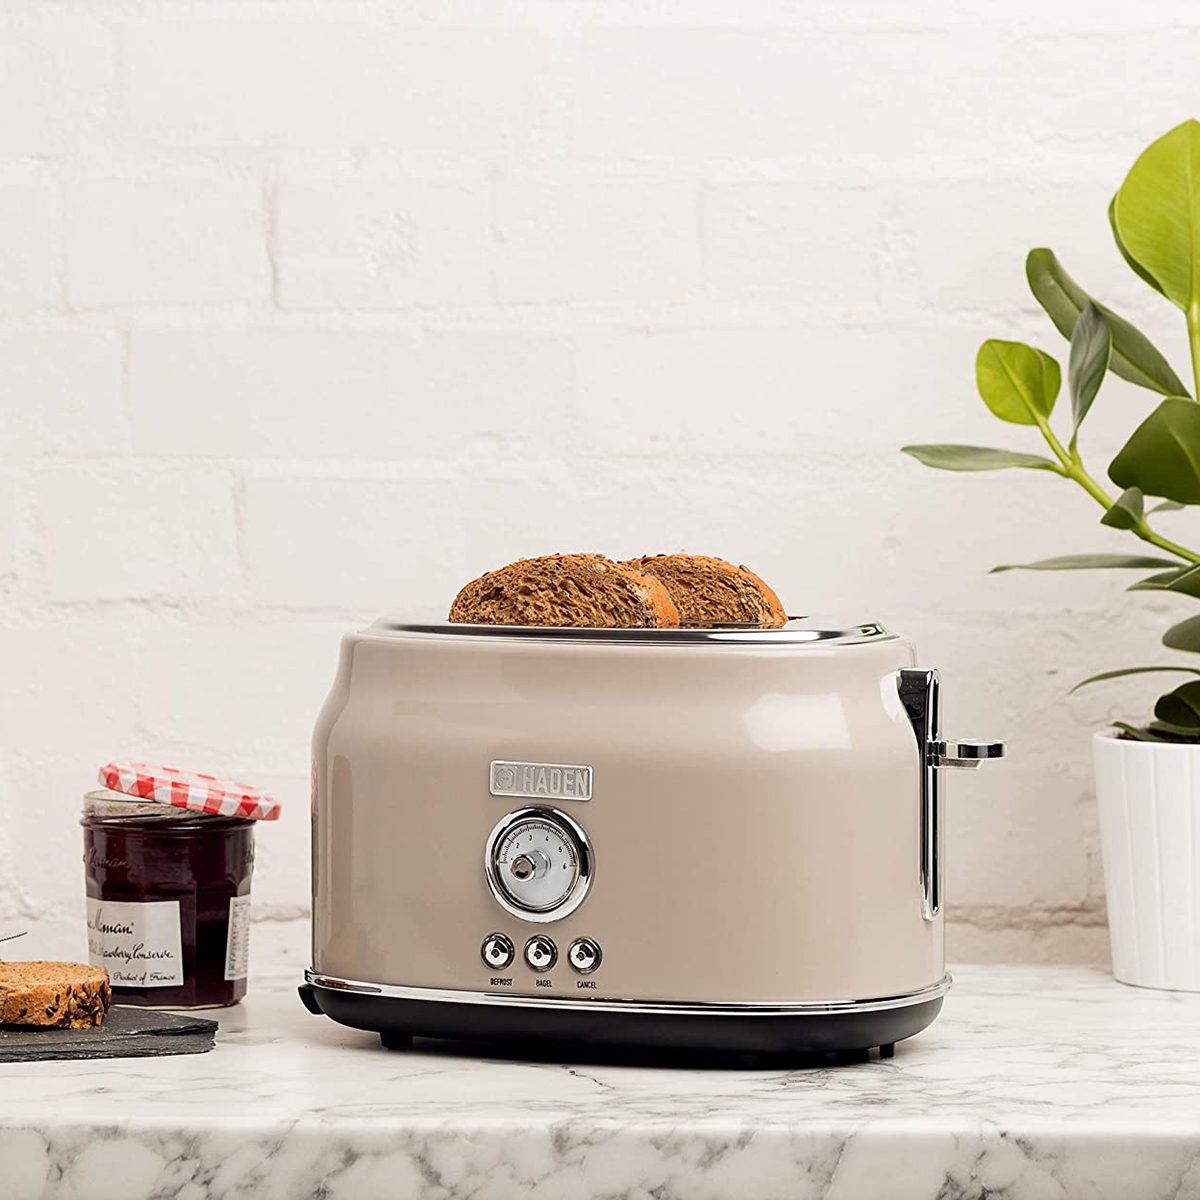 Haden DORSET 2 Slice, Wide Slot, Stainless Steel Retro Toaster with Adjustable Browning Control and Cancel, Defrost and Reheat Settings in Putty Beige